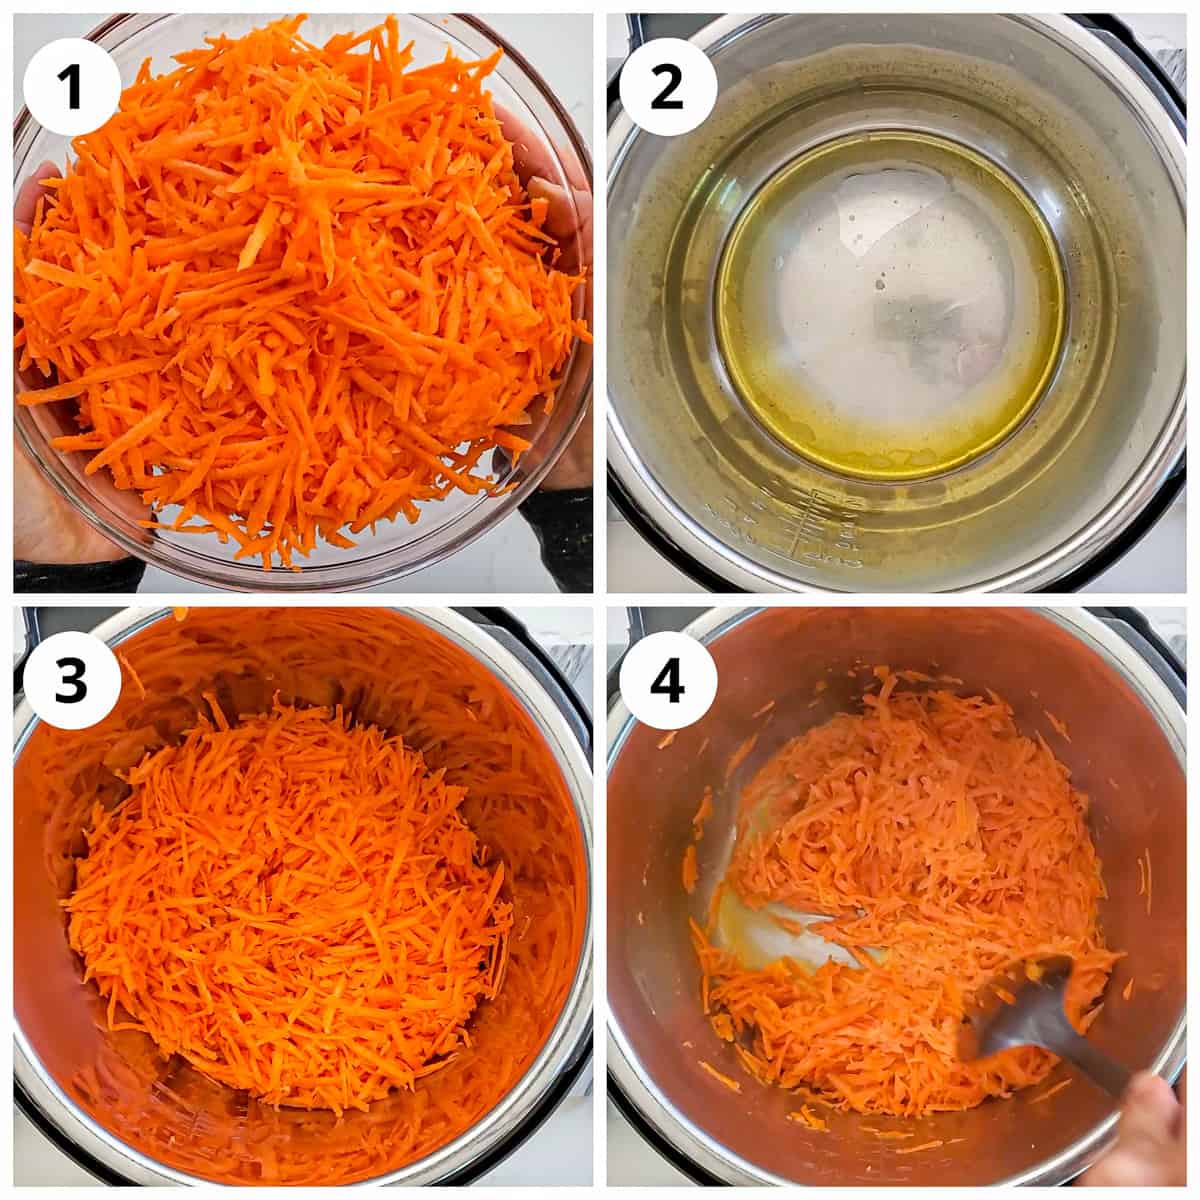 Steps for roasting shredded carrots with ghee to make gajar halwa in Instant pot